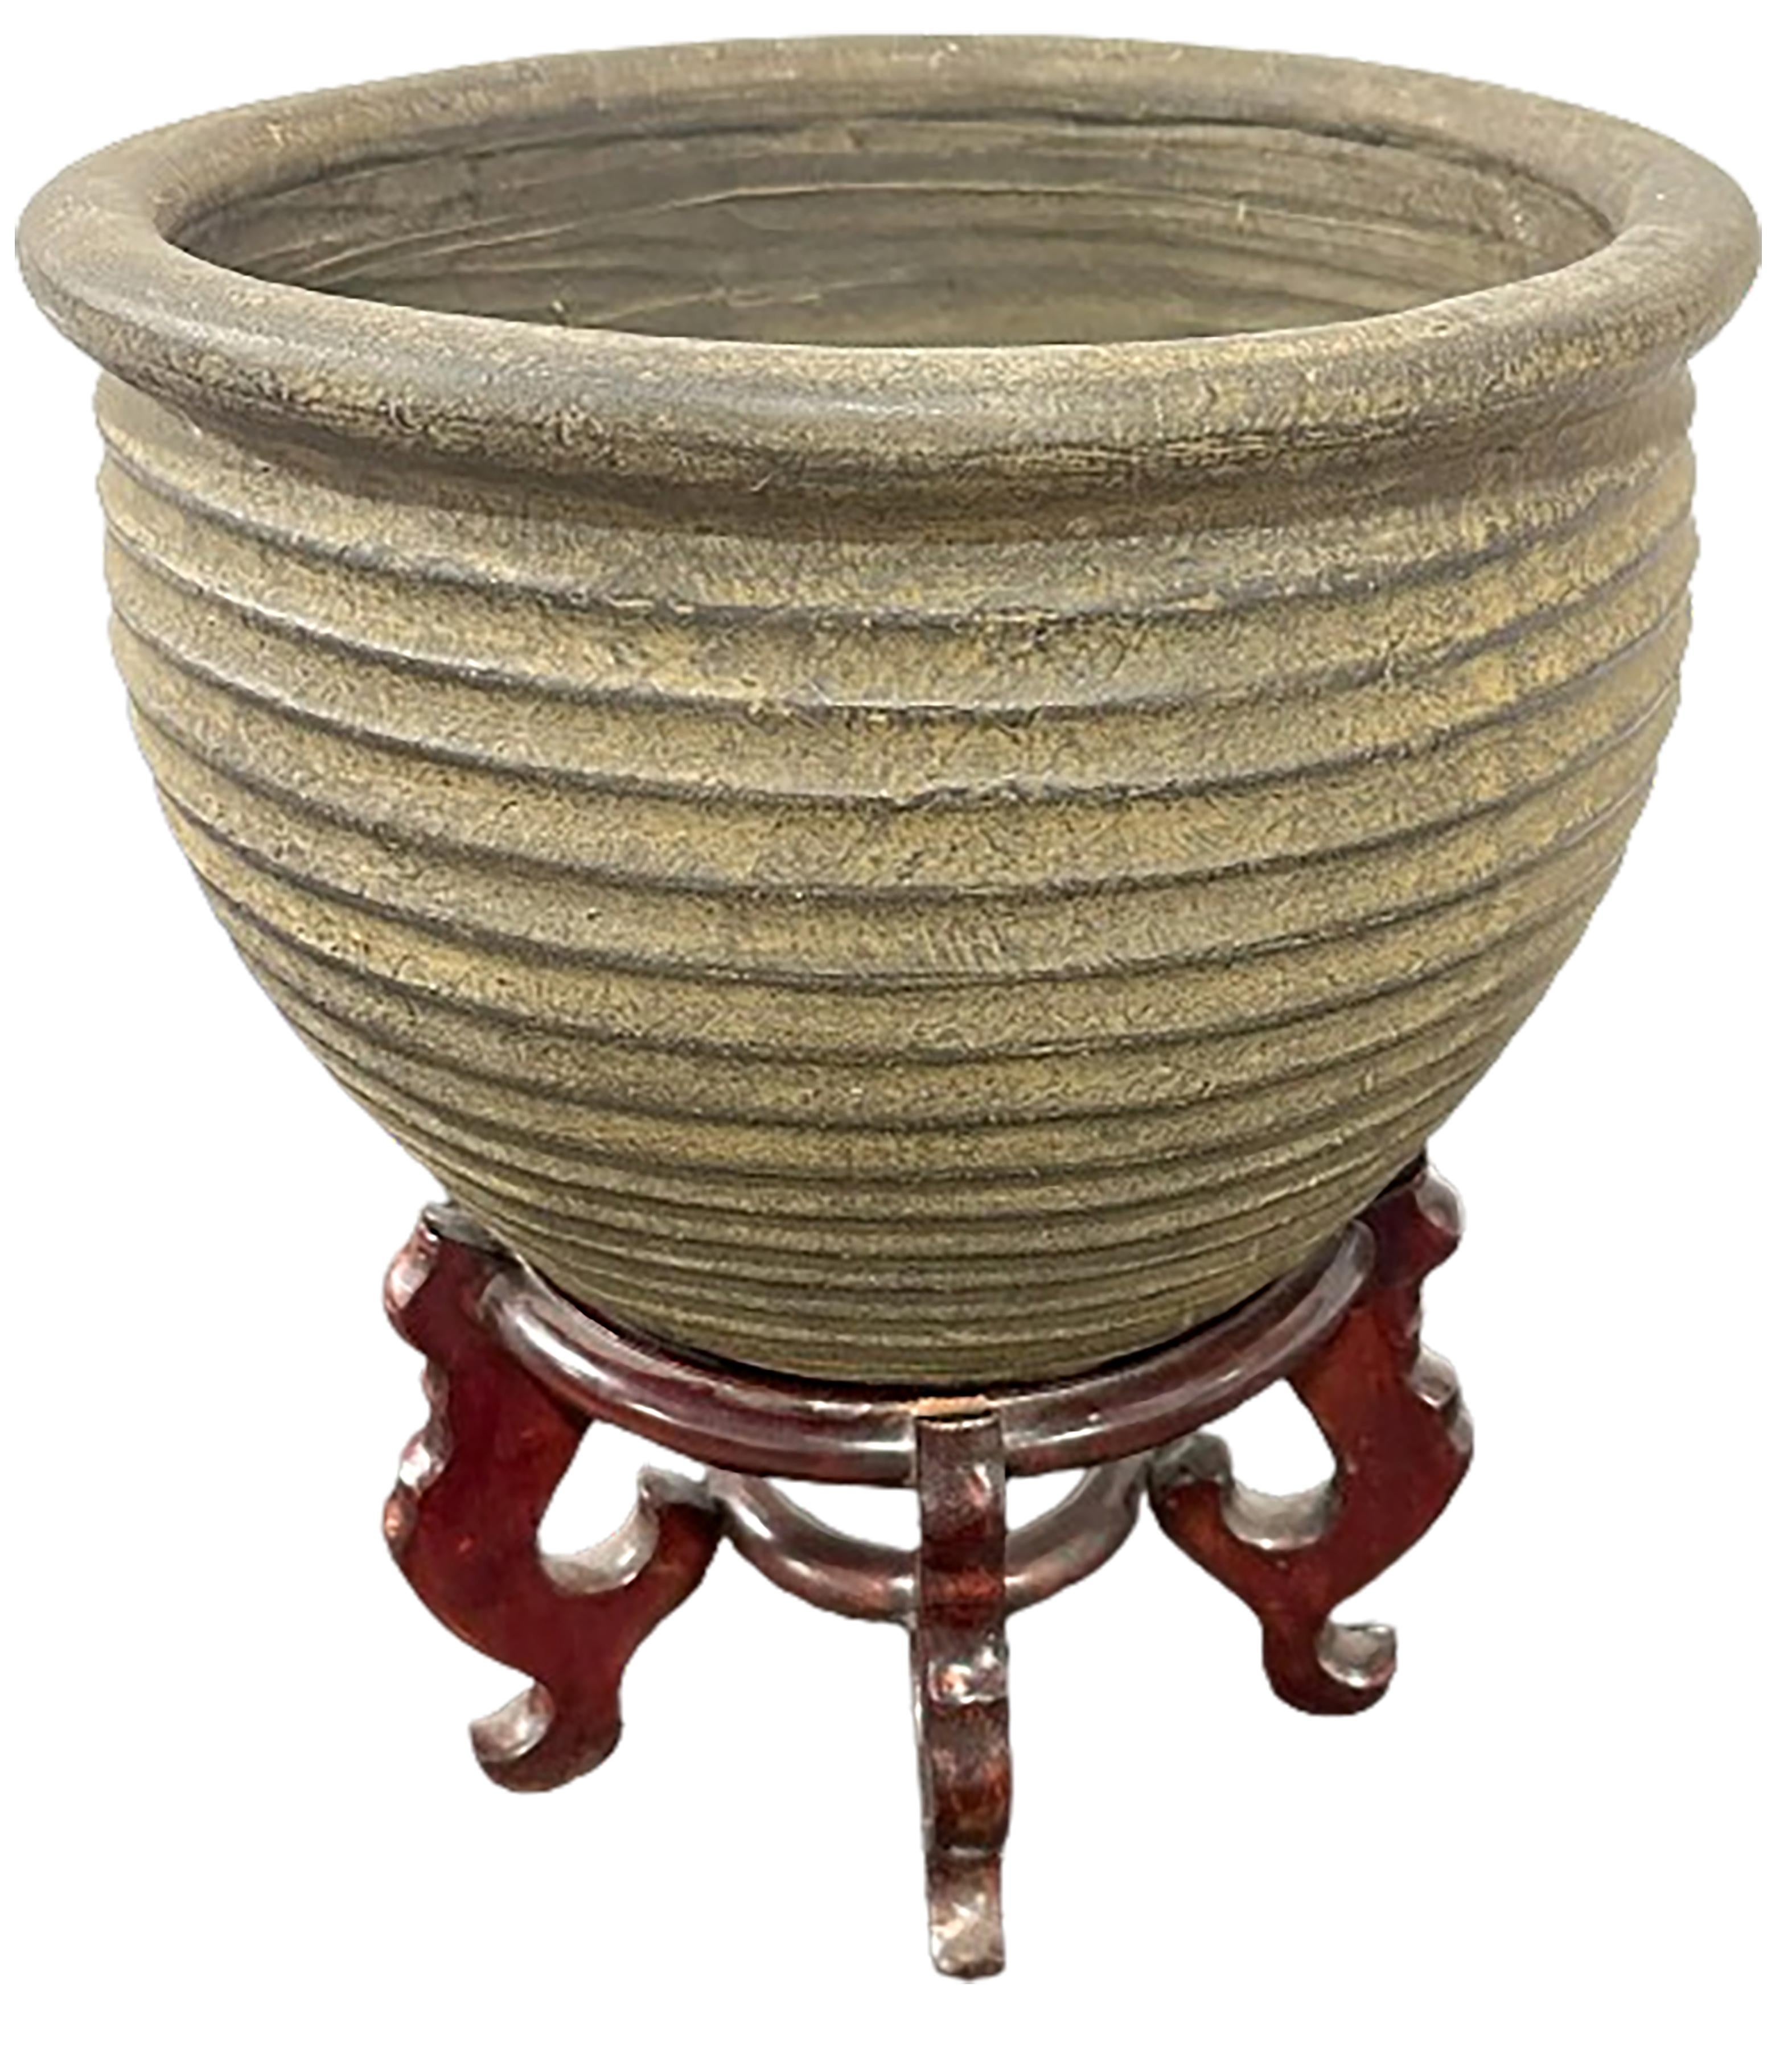   Antique Terracotta Planter with Carved Cherrywood Chinese lacquered Base In Good Condition For Sale In Dallas, TX